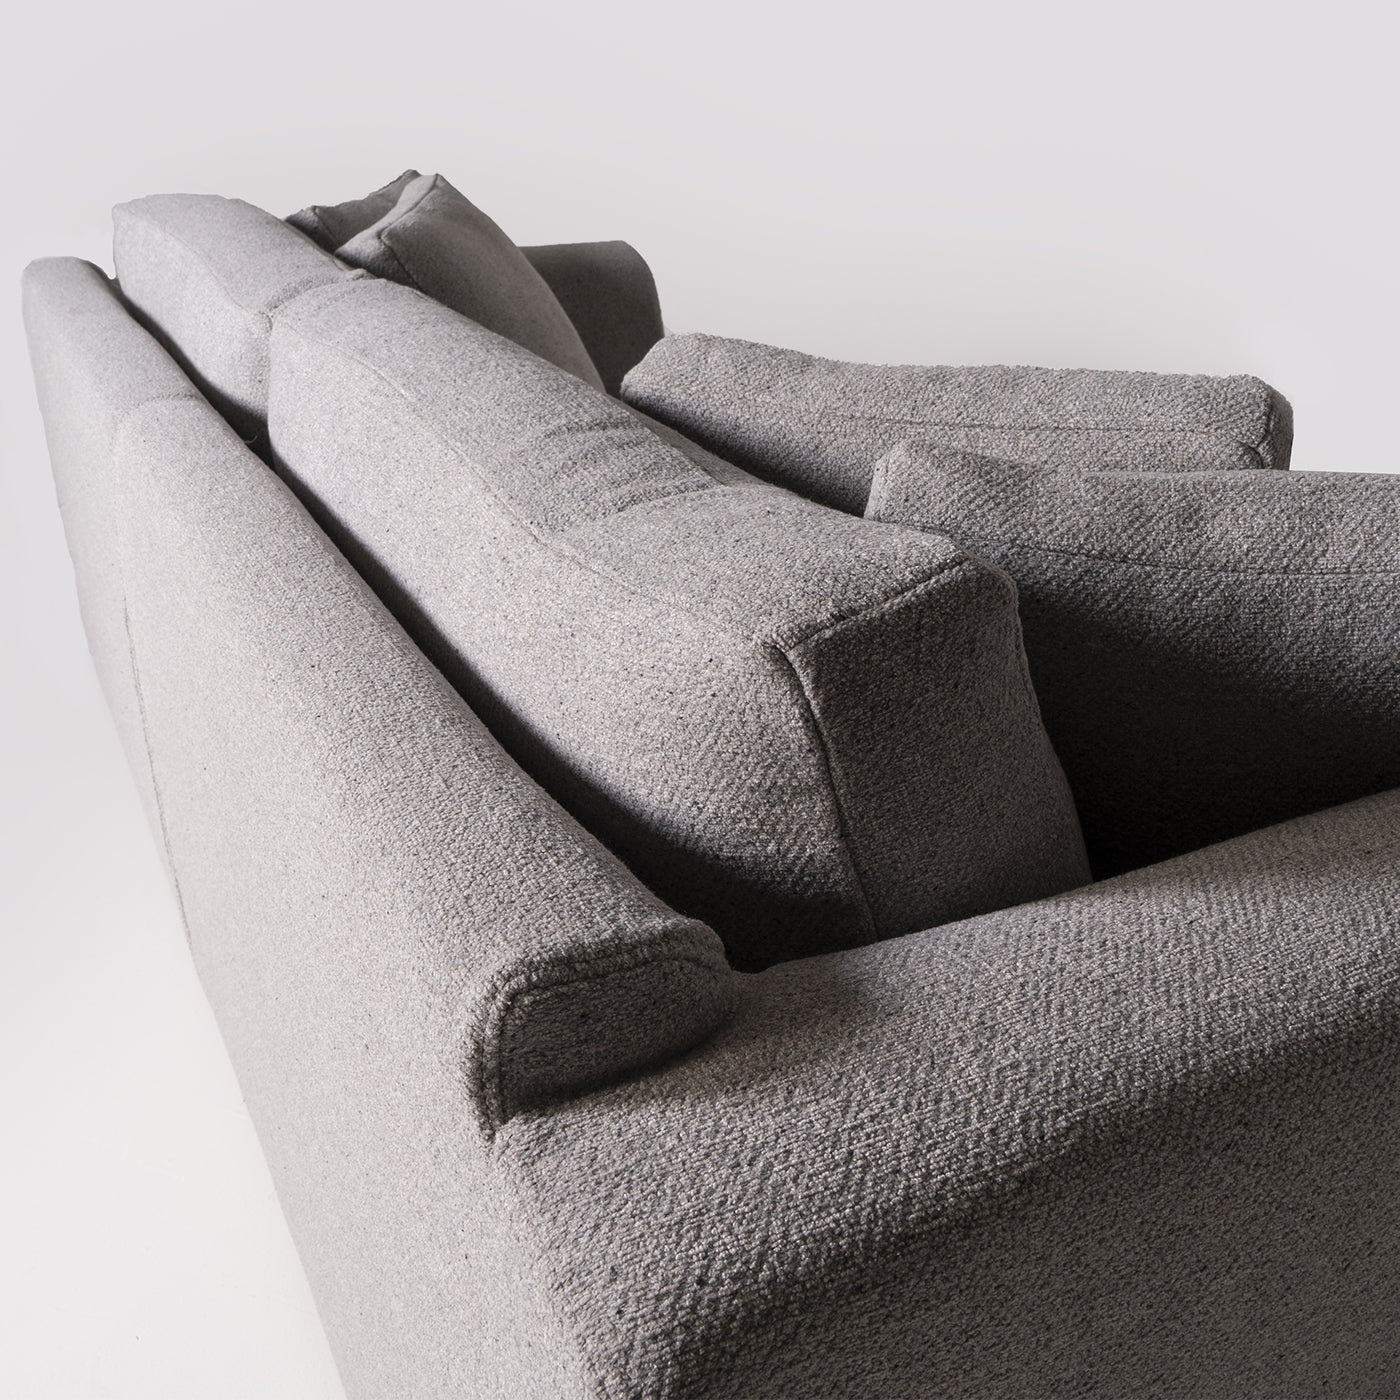 Sandy Sofa 3 seats by Marco and Giulio Mantellassi - Alternative view 4